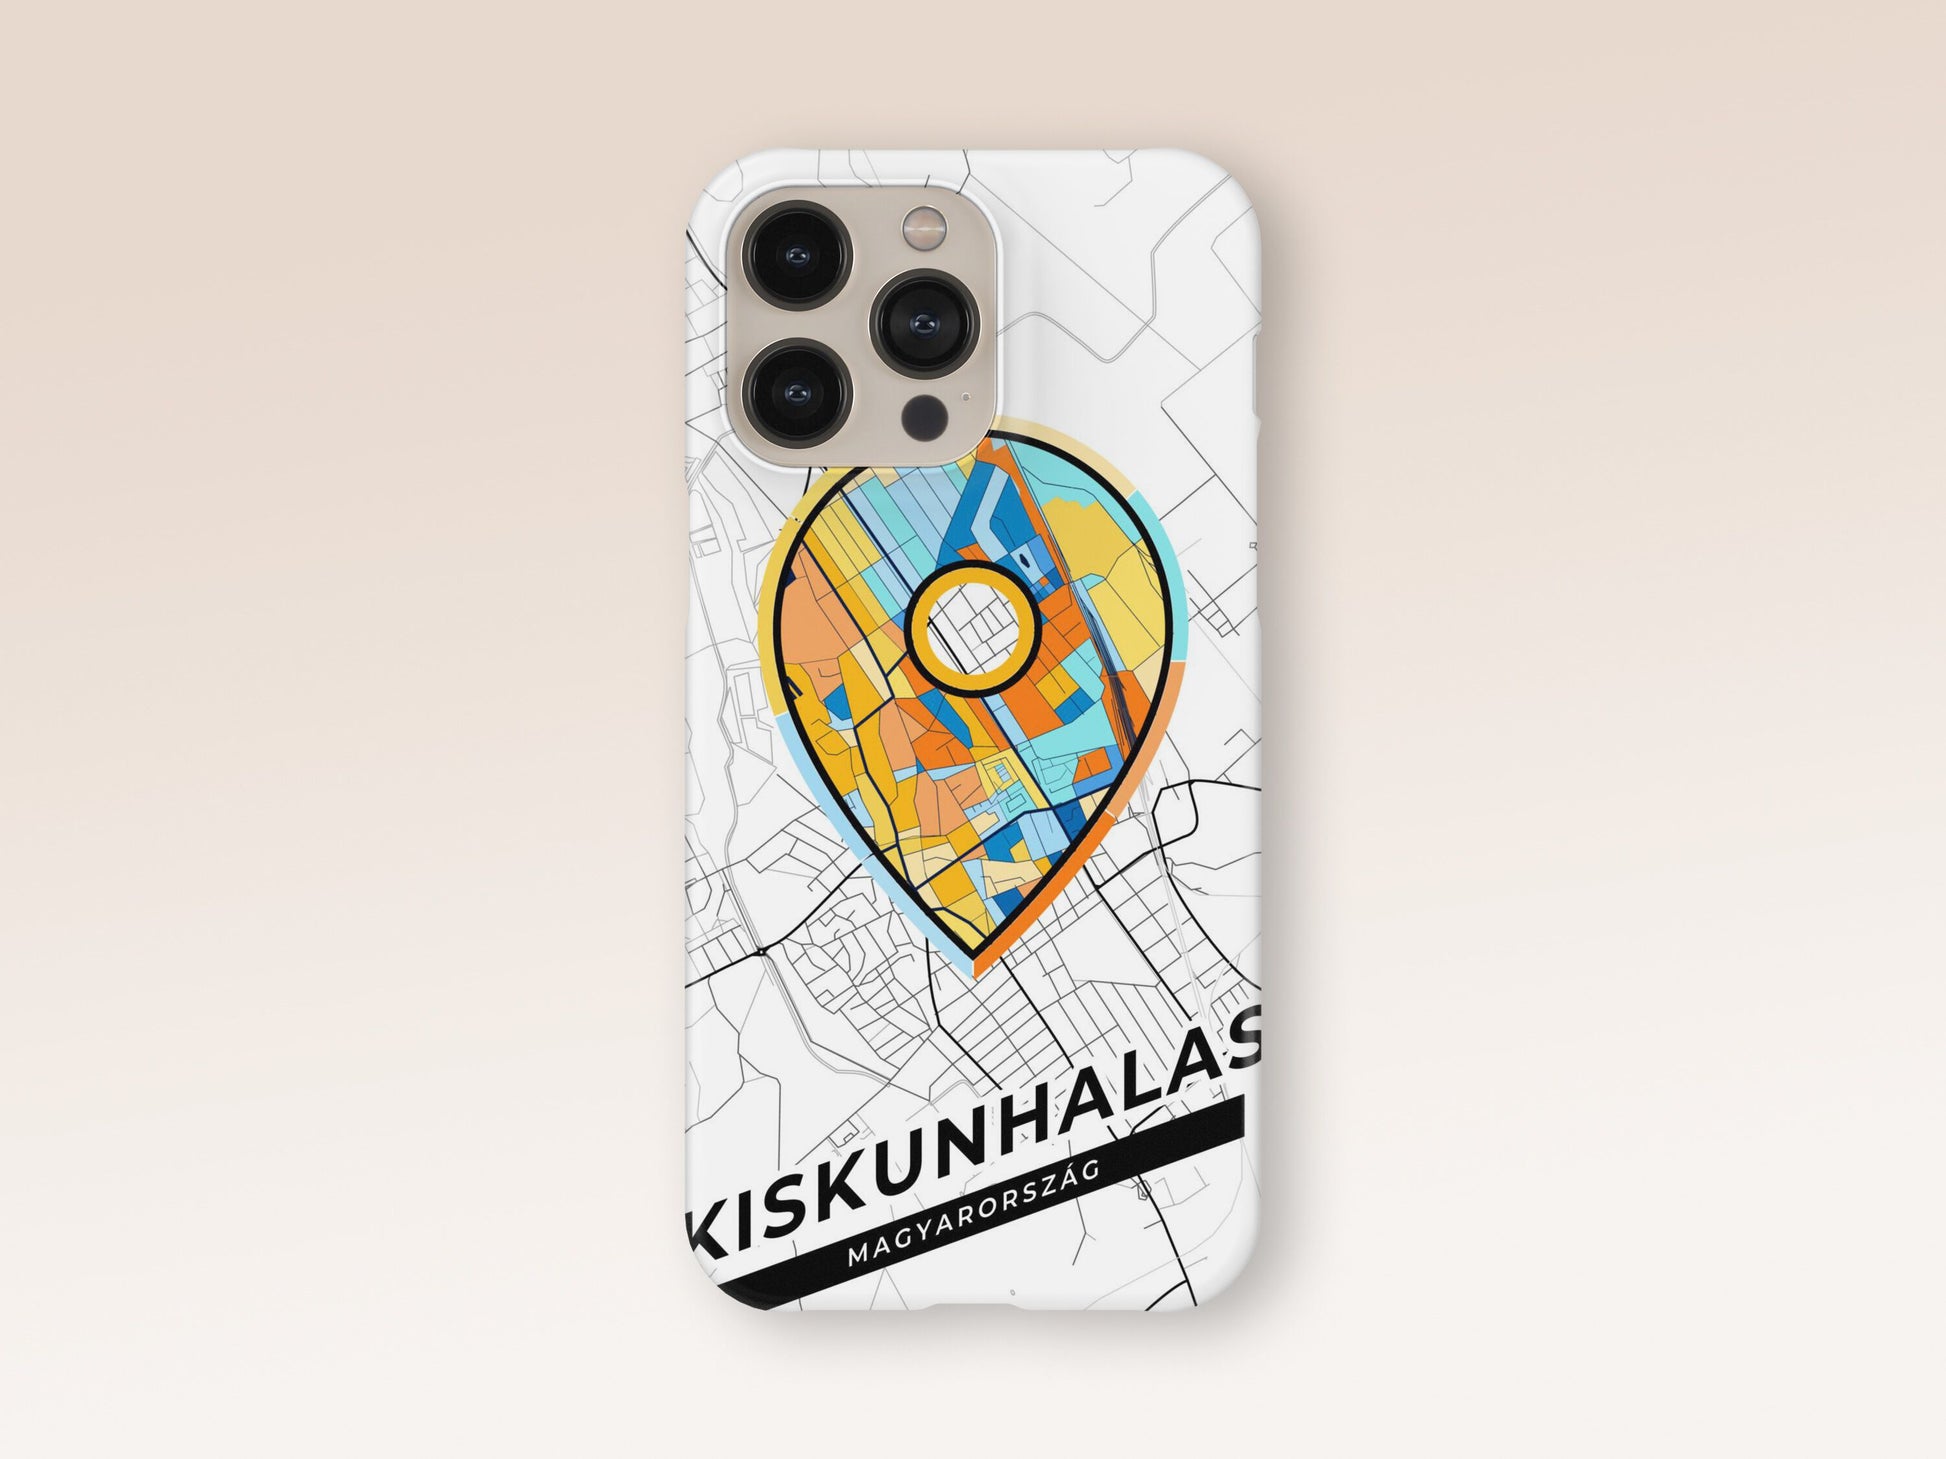 Kiskunhalas Hungary slim phone case with colorful icon. Birthday, wedding or housewarming gift. Couple match cases. 1